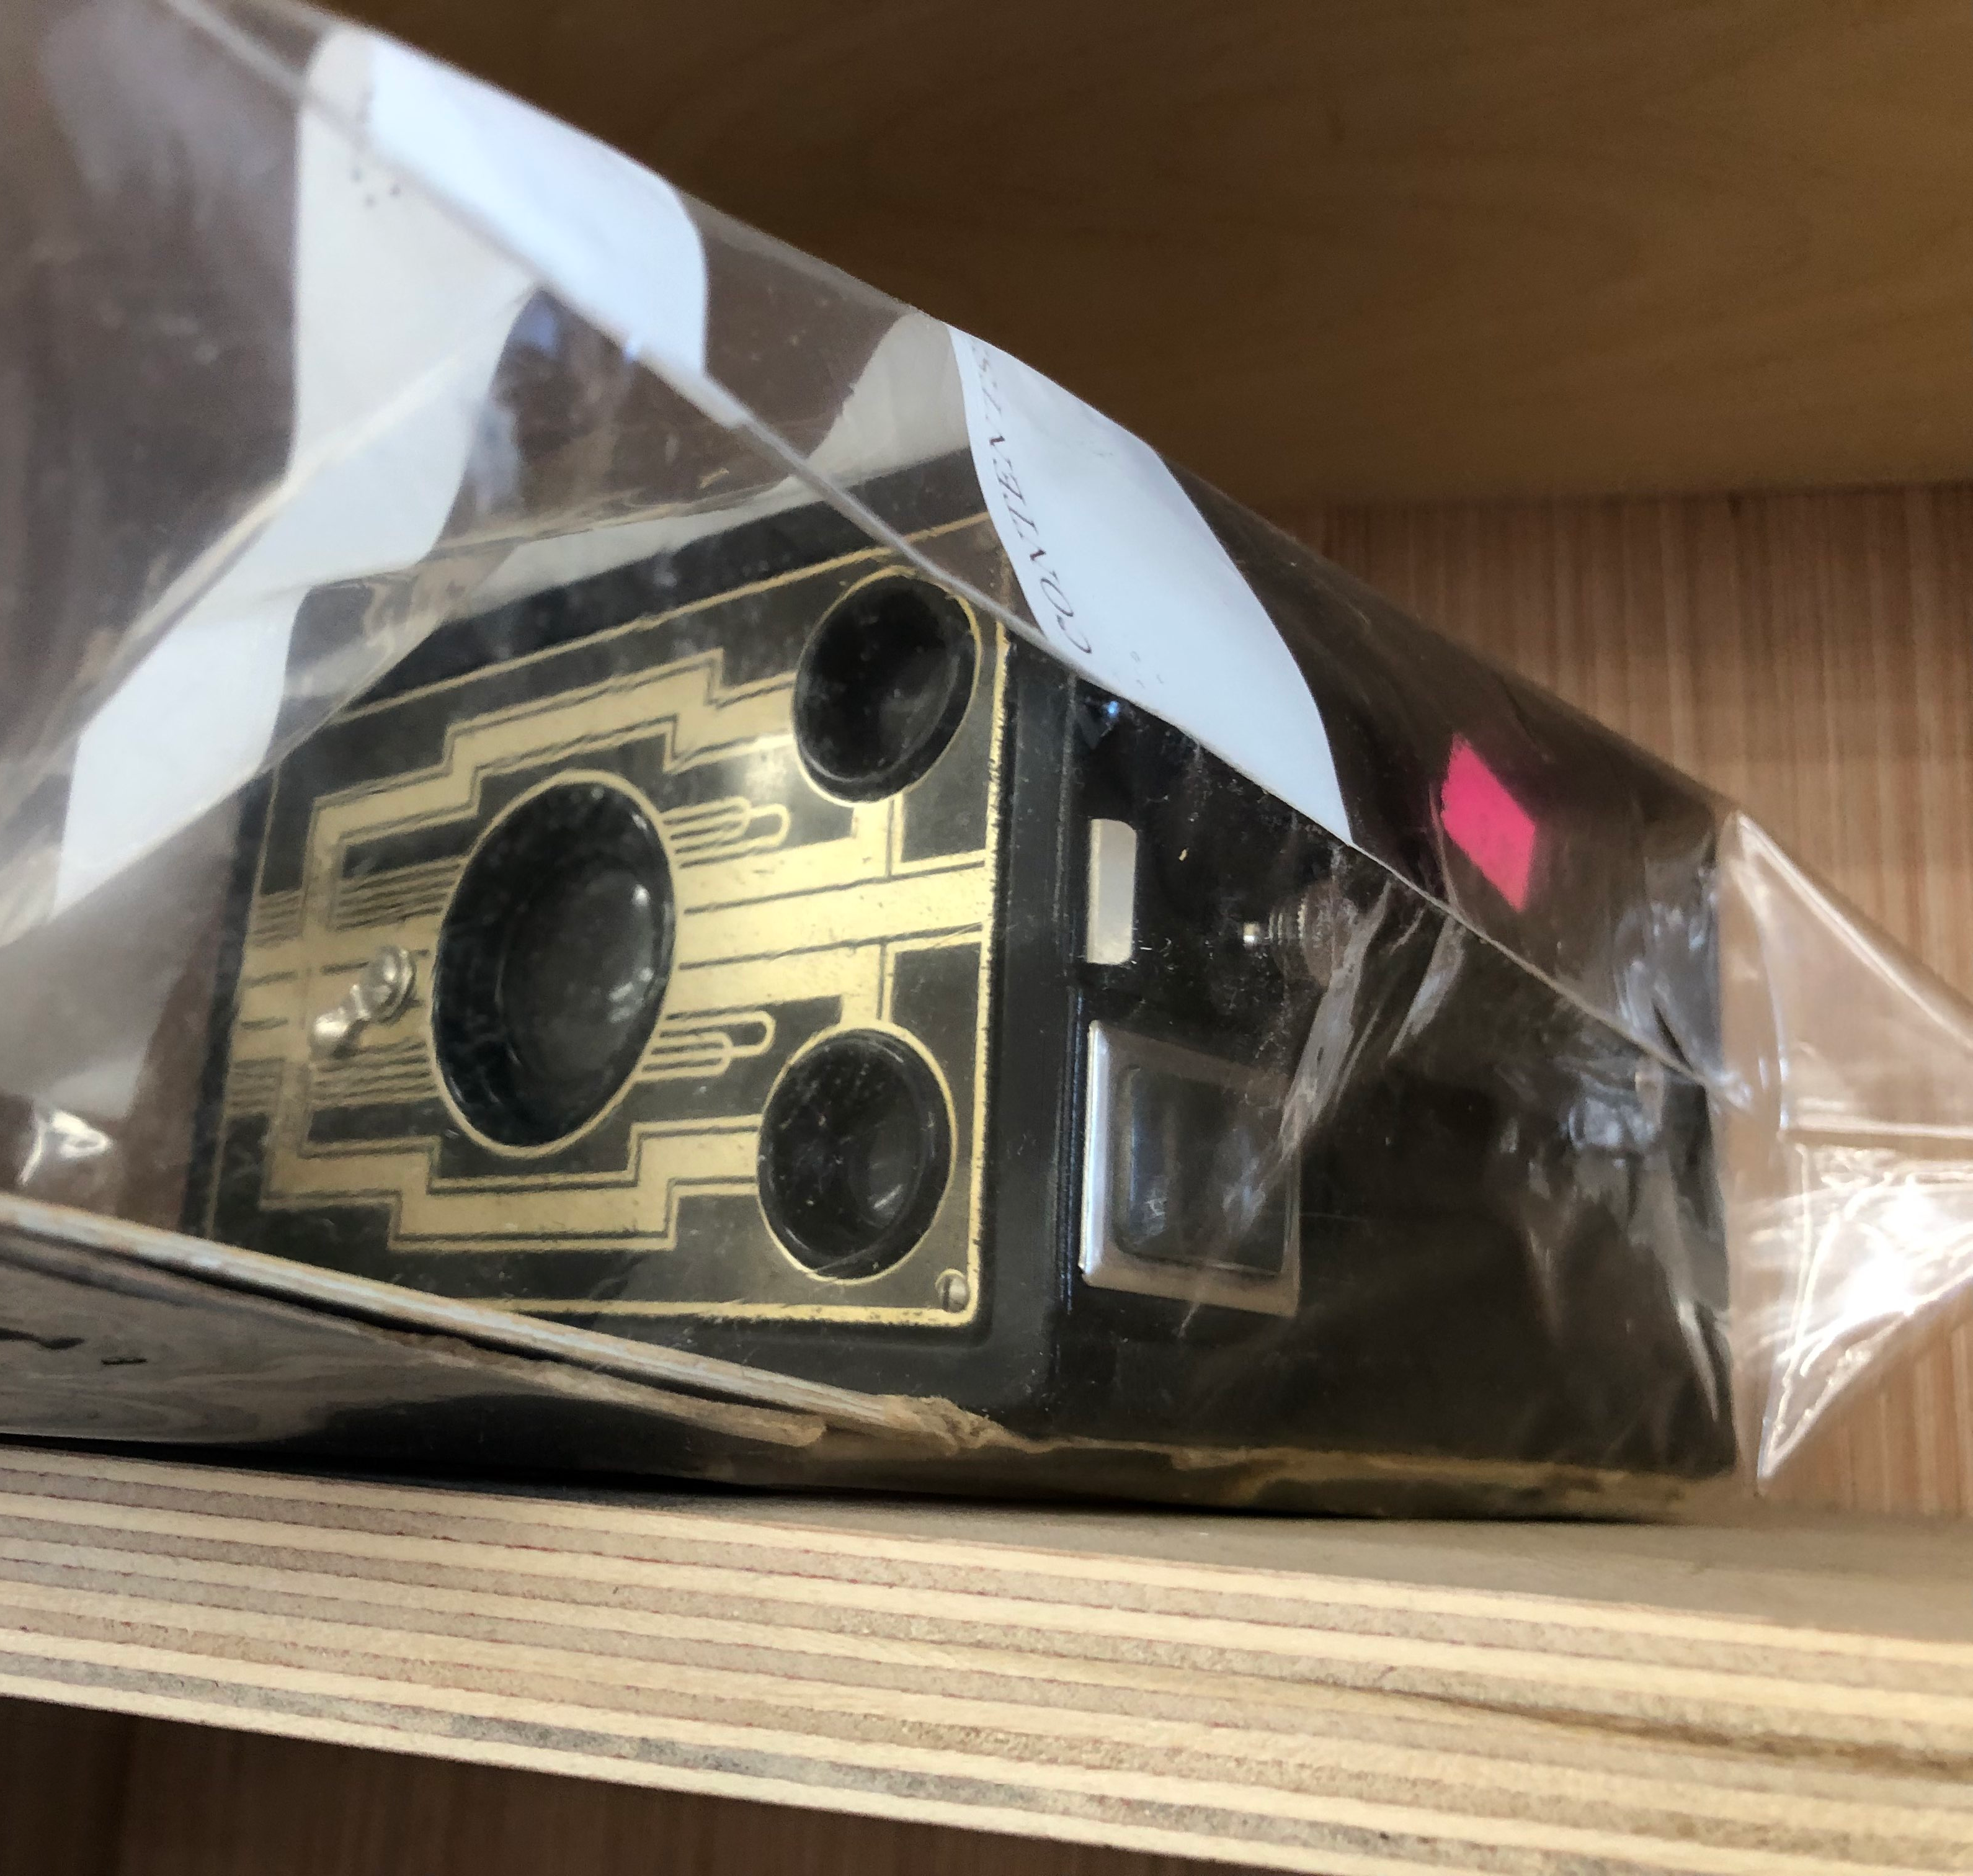 a black box camera with a geometric art deco design on the front. it is in a plastic bag ans sitting on a wooden shelf